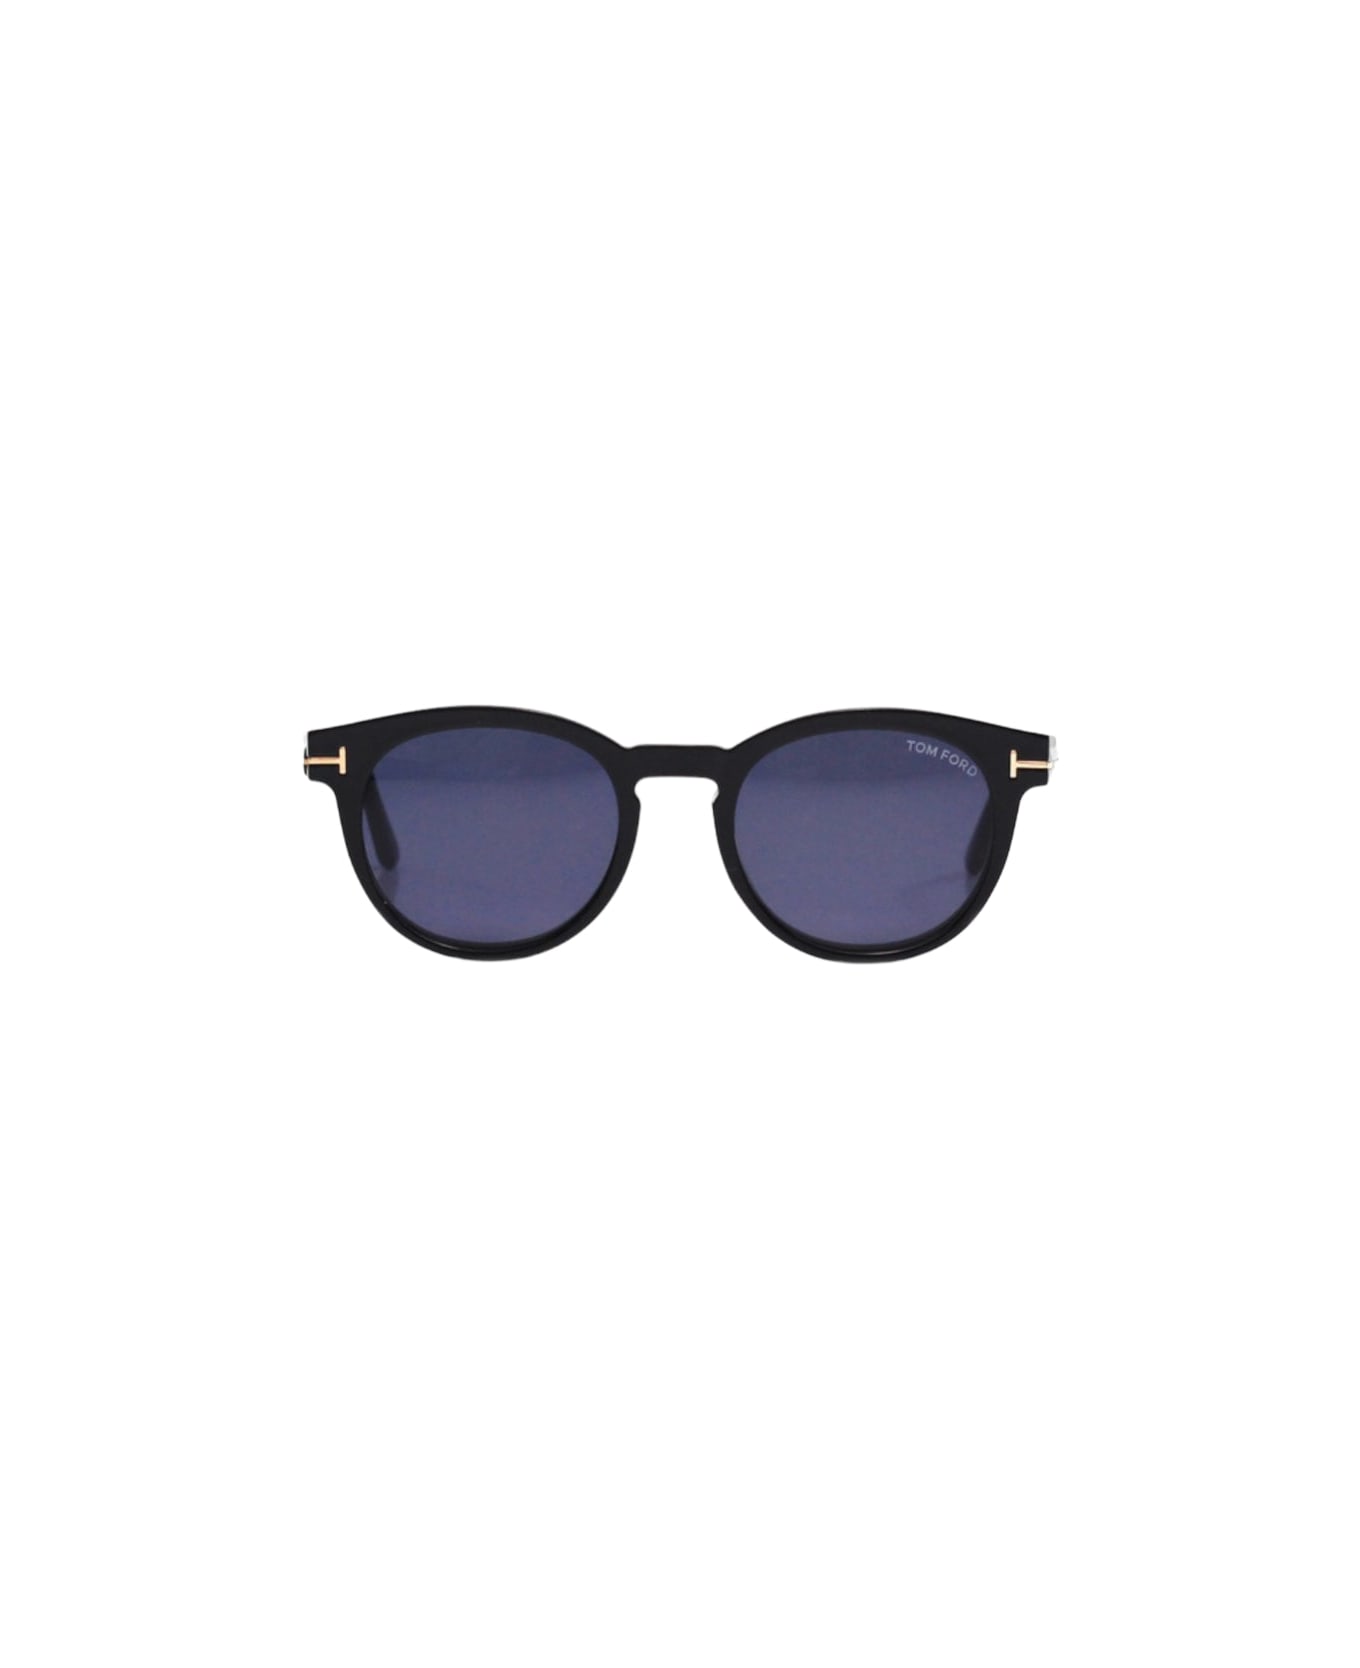 Tom Ford Ft5823- Black - With Clip For Sun Glasses